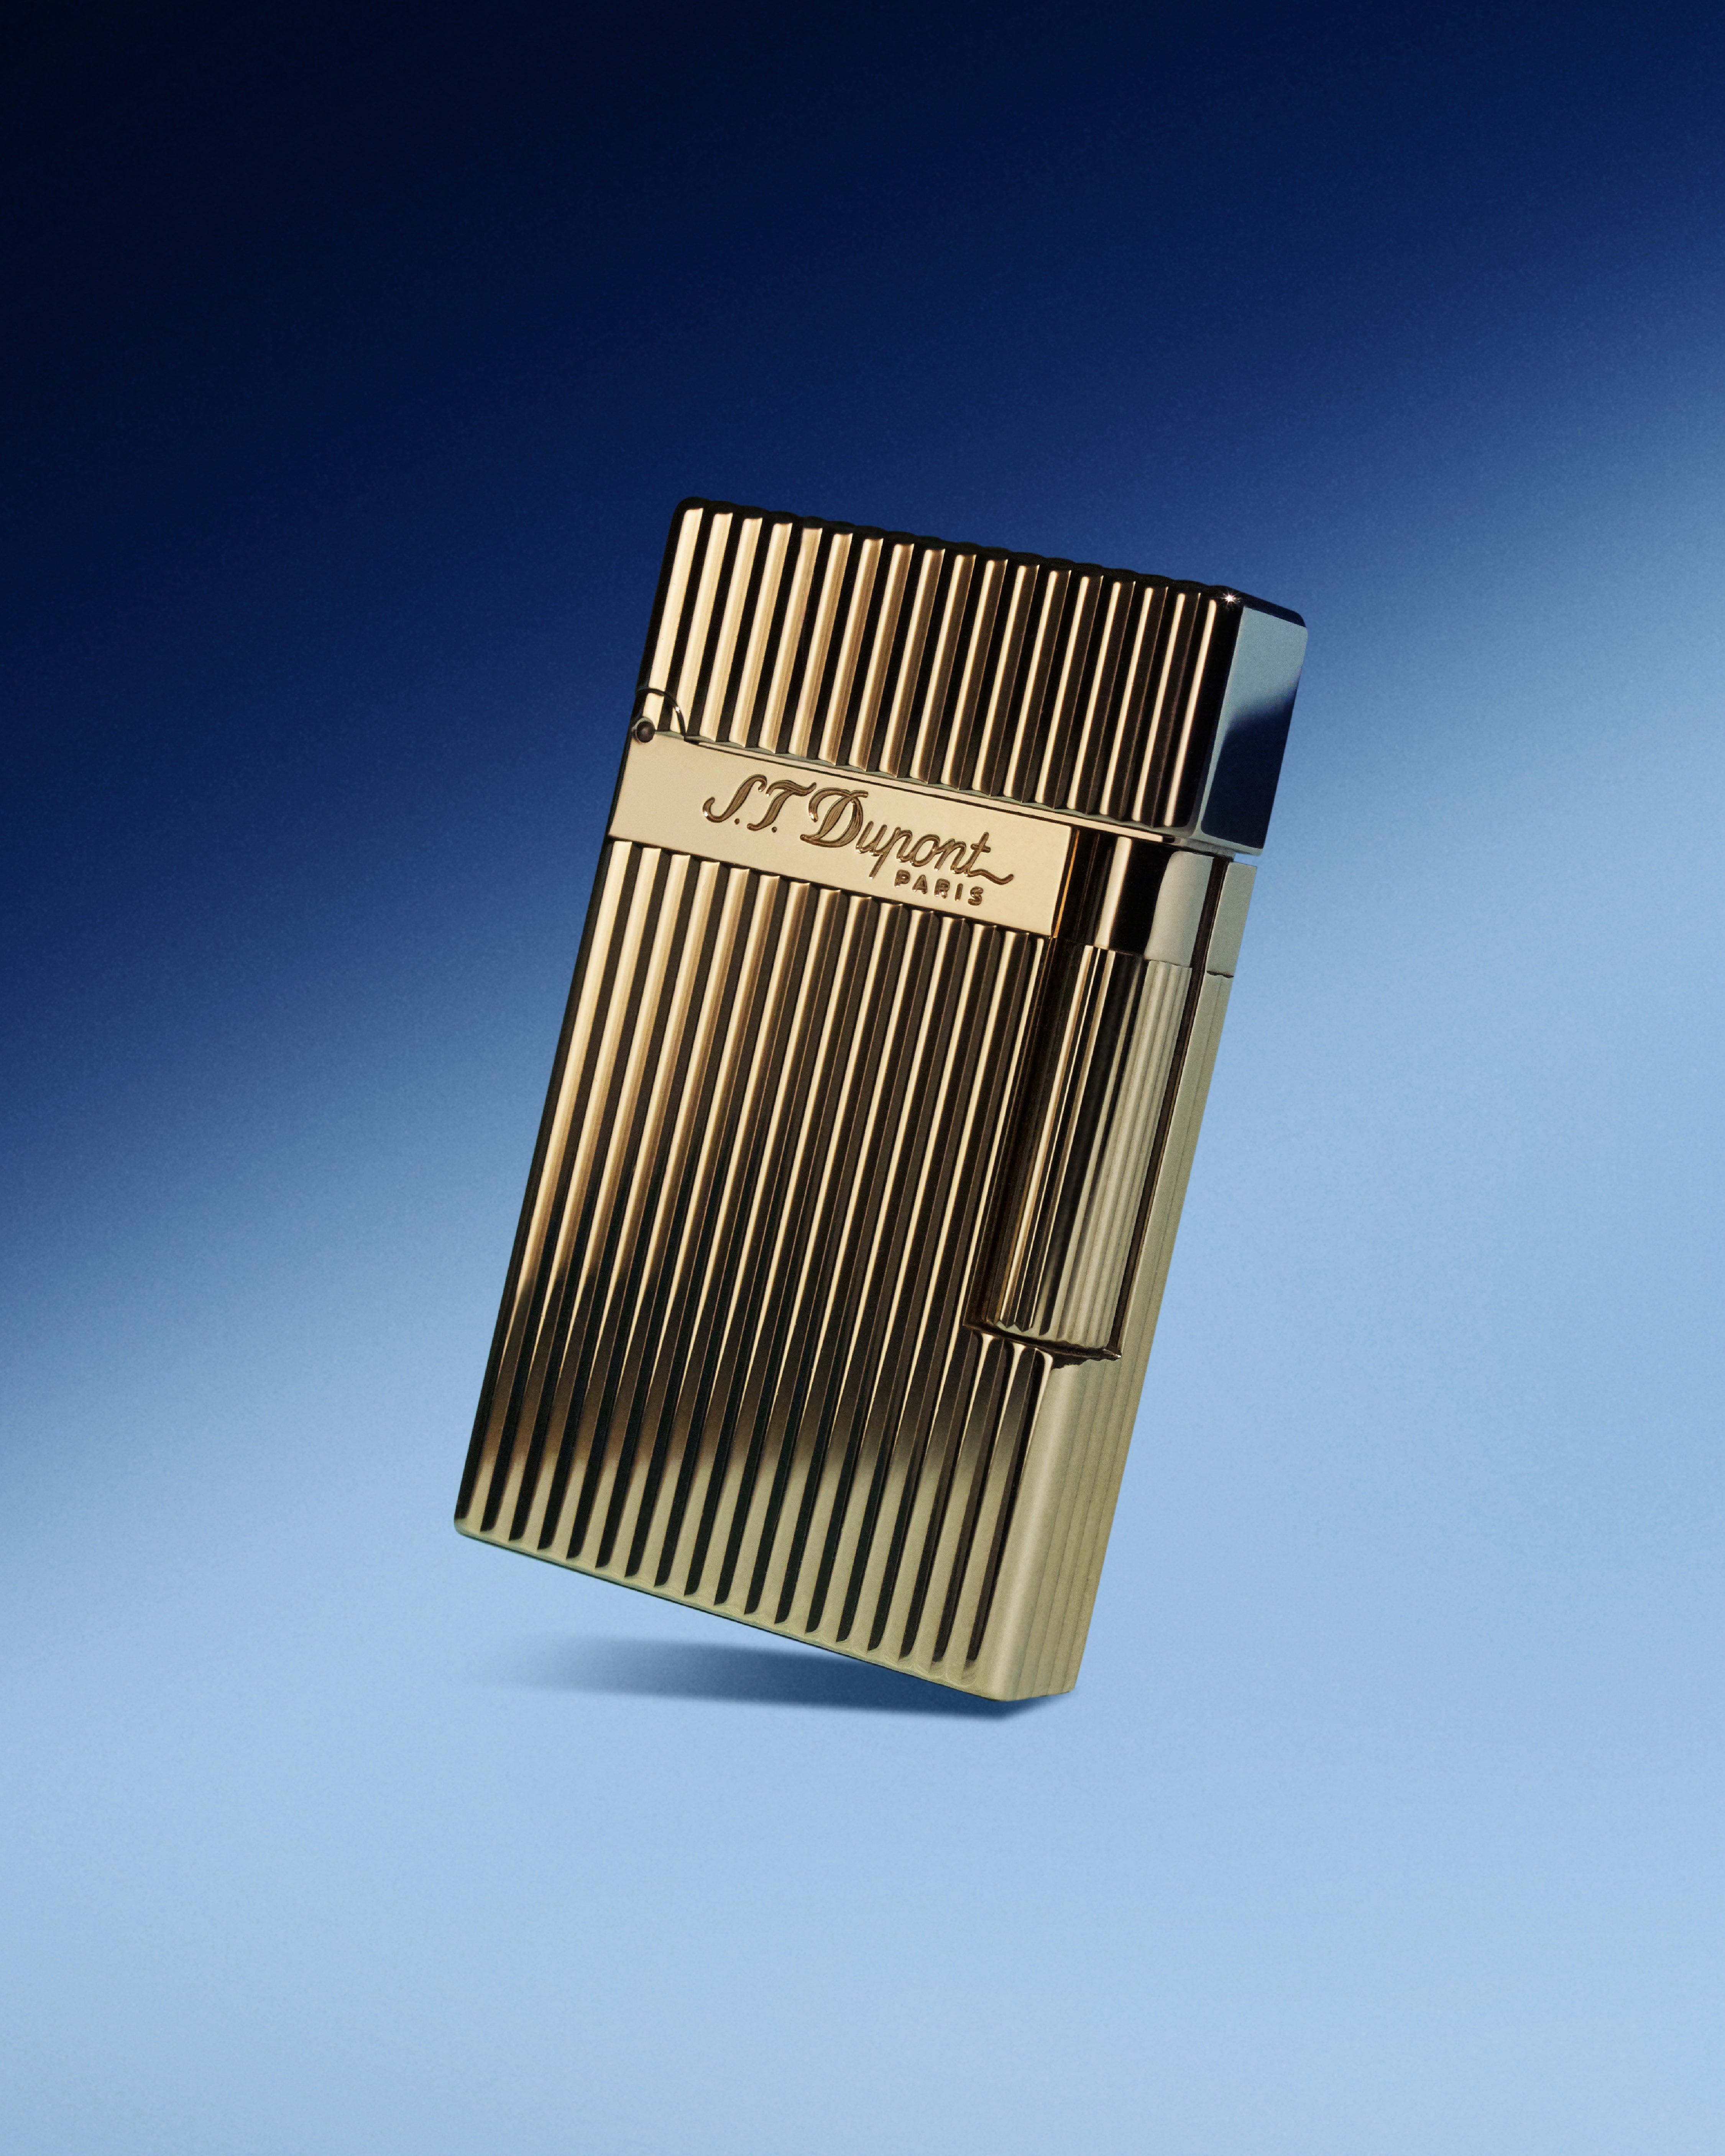 S.T. Dupont Luxury Lighter collection | S.T. Dupont – stdupont.com